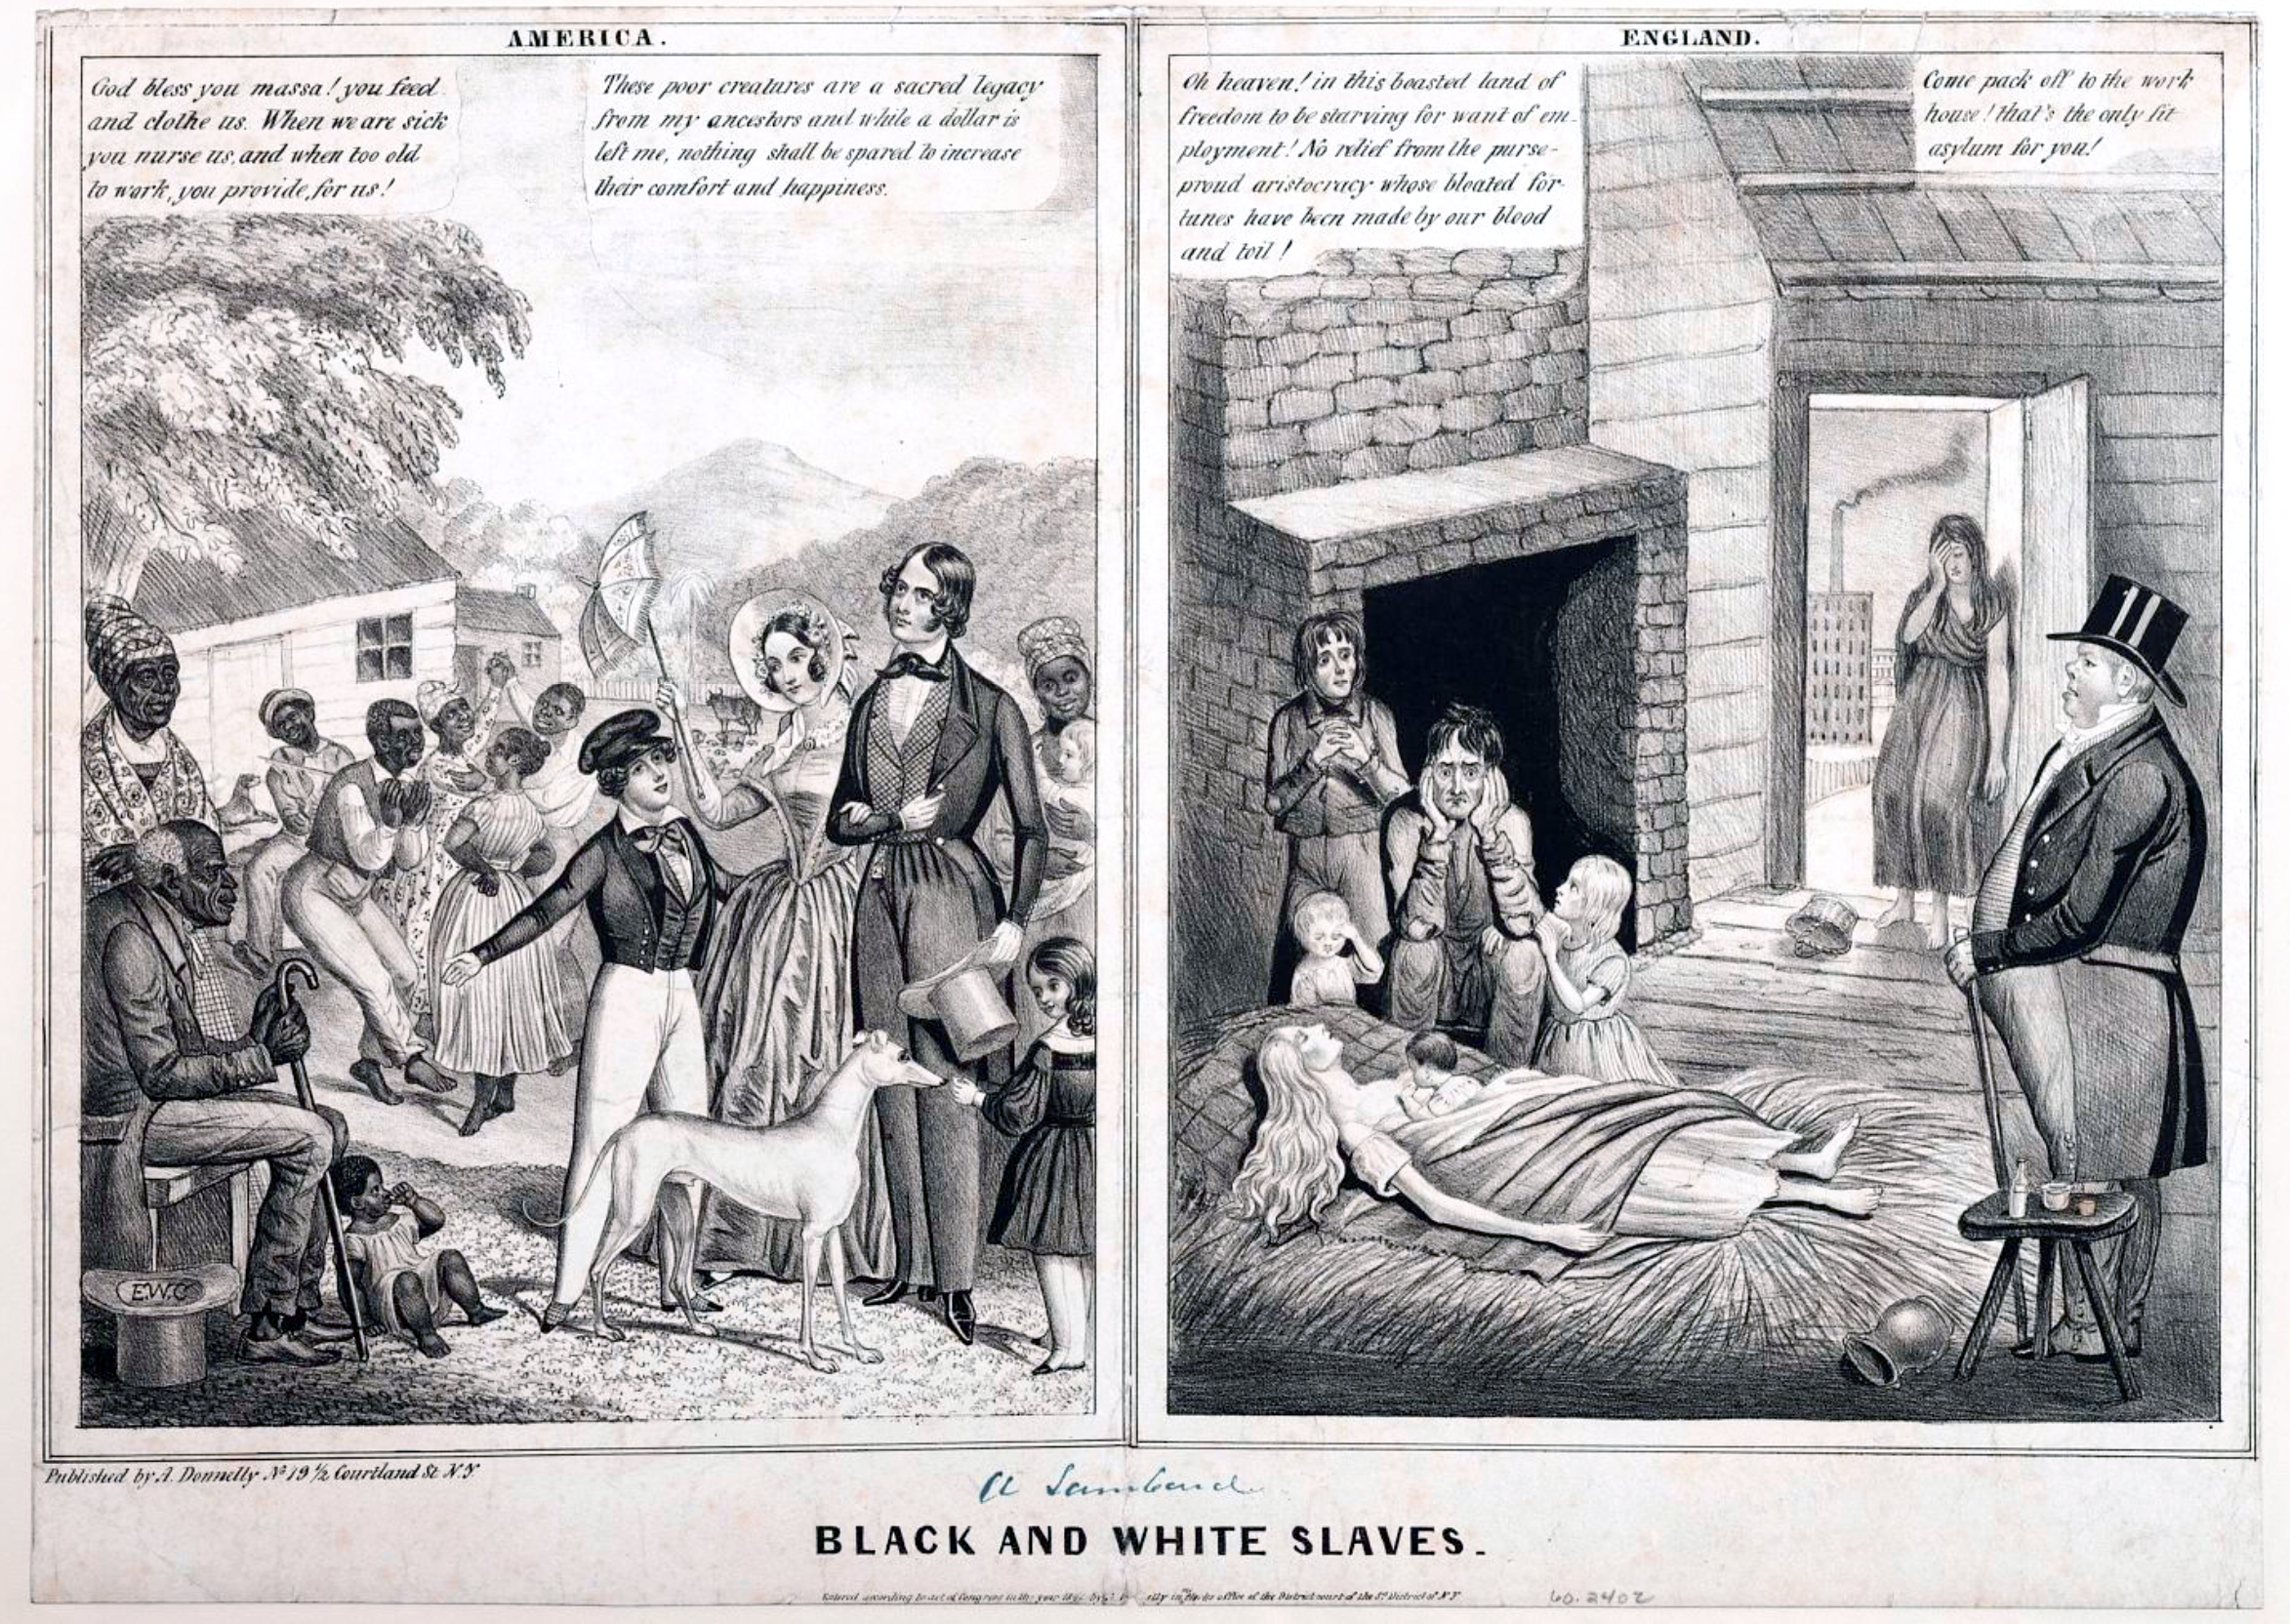 This cartoon contrasts the “happy, well cared-for” enslaved Black people of the American South with the “wage slaves” of England’s factories. Edward Williams Clay, America (Black and White Slaves), c. 1841, lithograph published by A. Donnelly, 31.43 x 48.26 cm (Smithsonian National Museum of American History)